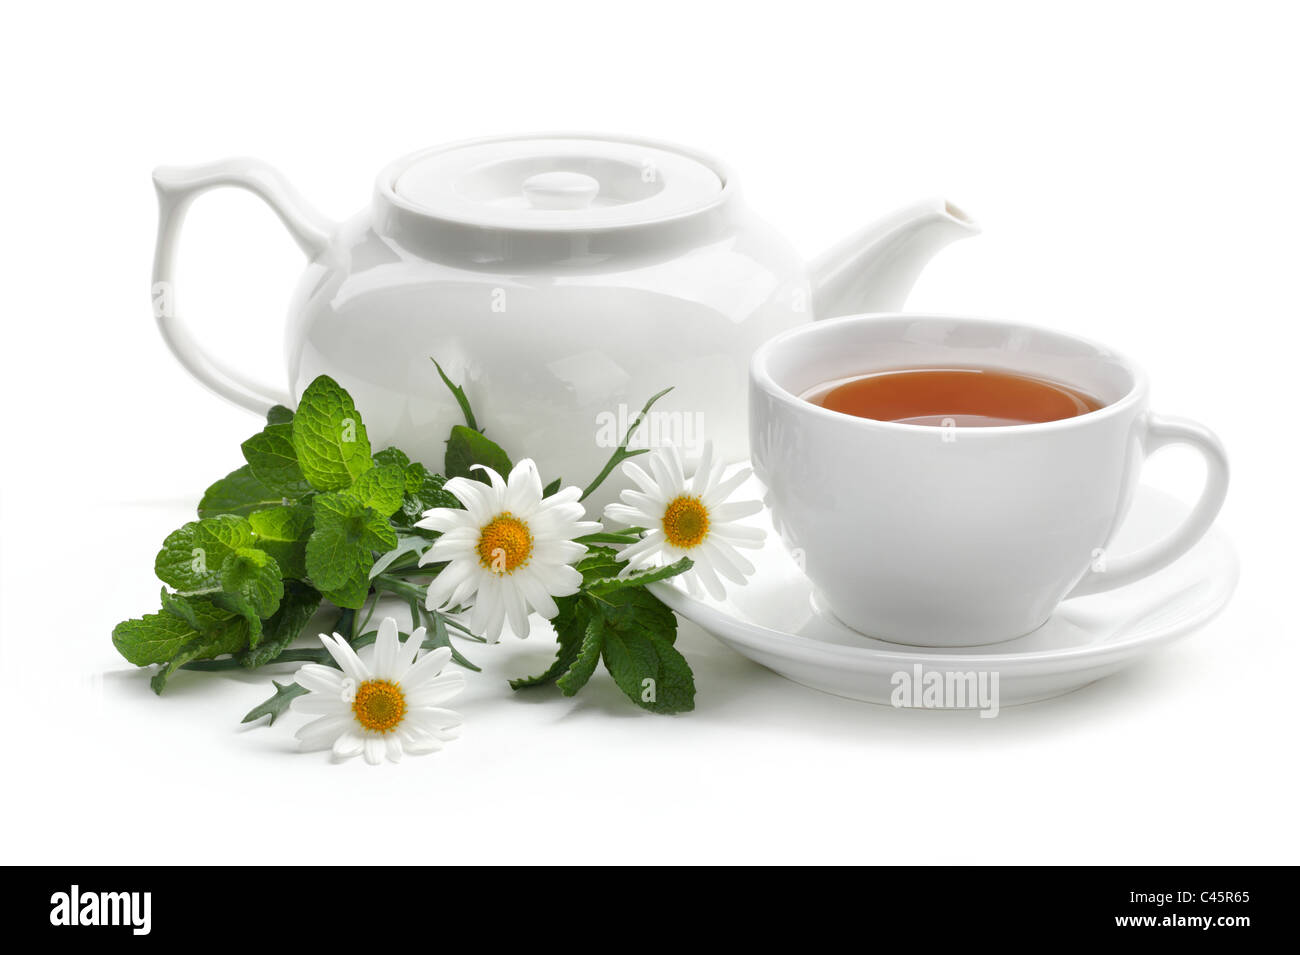 Black tea with fresh mint leaves and daisy. Isolated on white background. Stock Photo